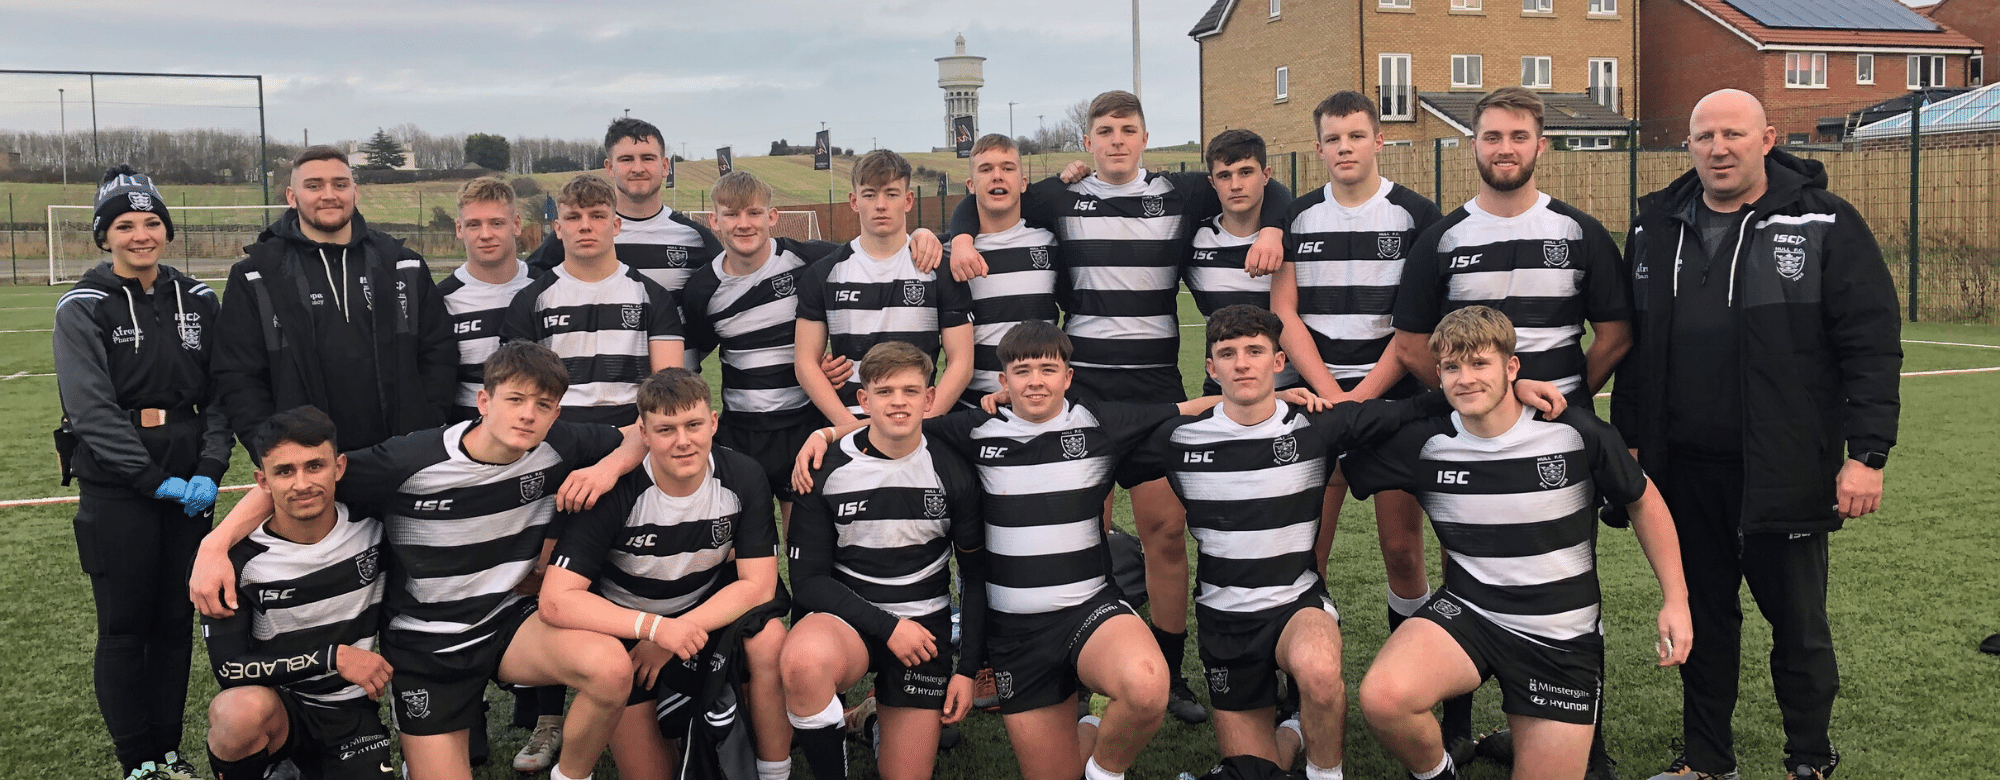 Hull FC’s Development Squad Crowned 2019/20 College League Champions